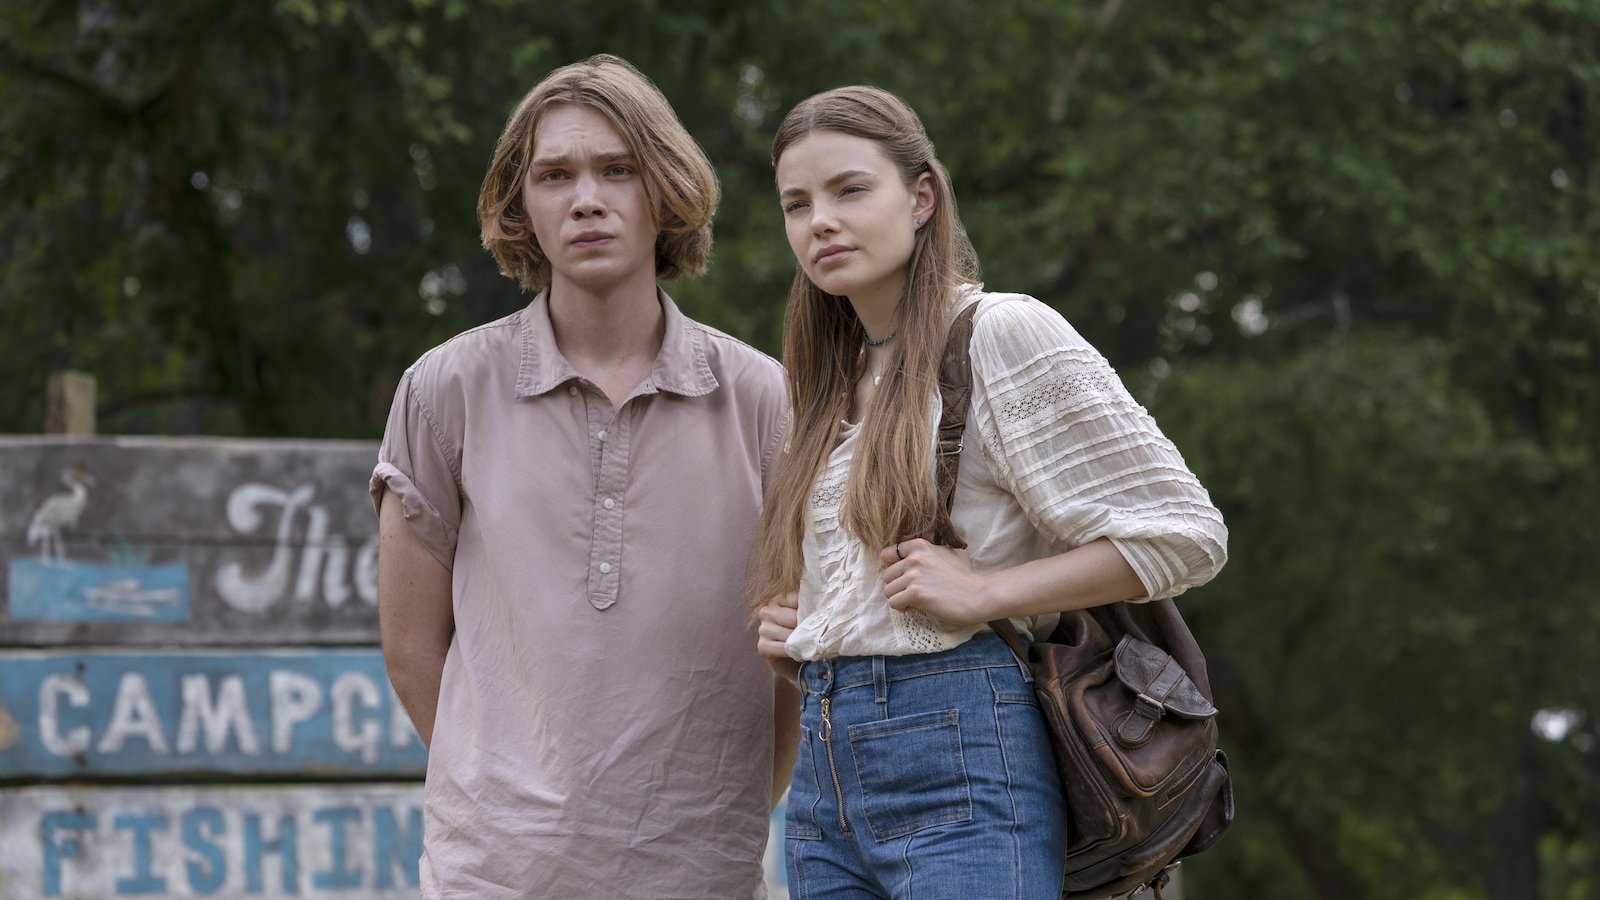 Looking For Alaska -- Episode 104 -- Looking For Alaska is an 8-episode limited series based on the John Green novel of the same name. It centers around teenager Miles “Pudge” Halter (Charlie Plummer), as he enrolls in boarding school to try to gain a deeper perspective on life. He falls in love with Alaska Young (Kristine Froseth), and finds a group of loyal friends. But after an unexpected tragedy, Miles and his close friends attempt to make sense of what they’ve been through. Miles (Charlie 